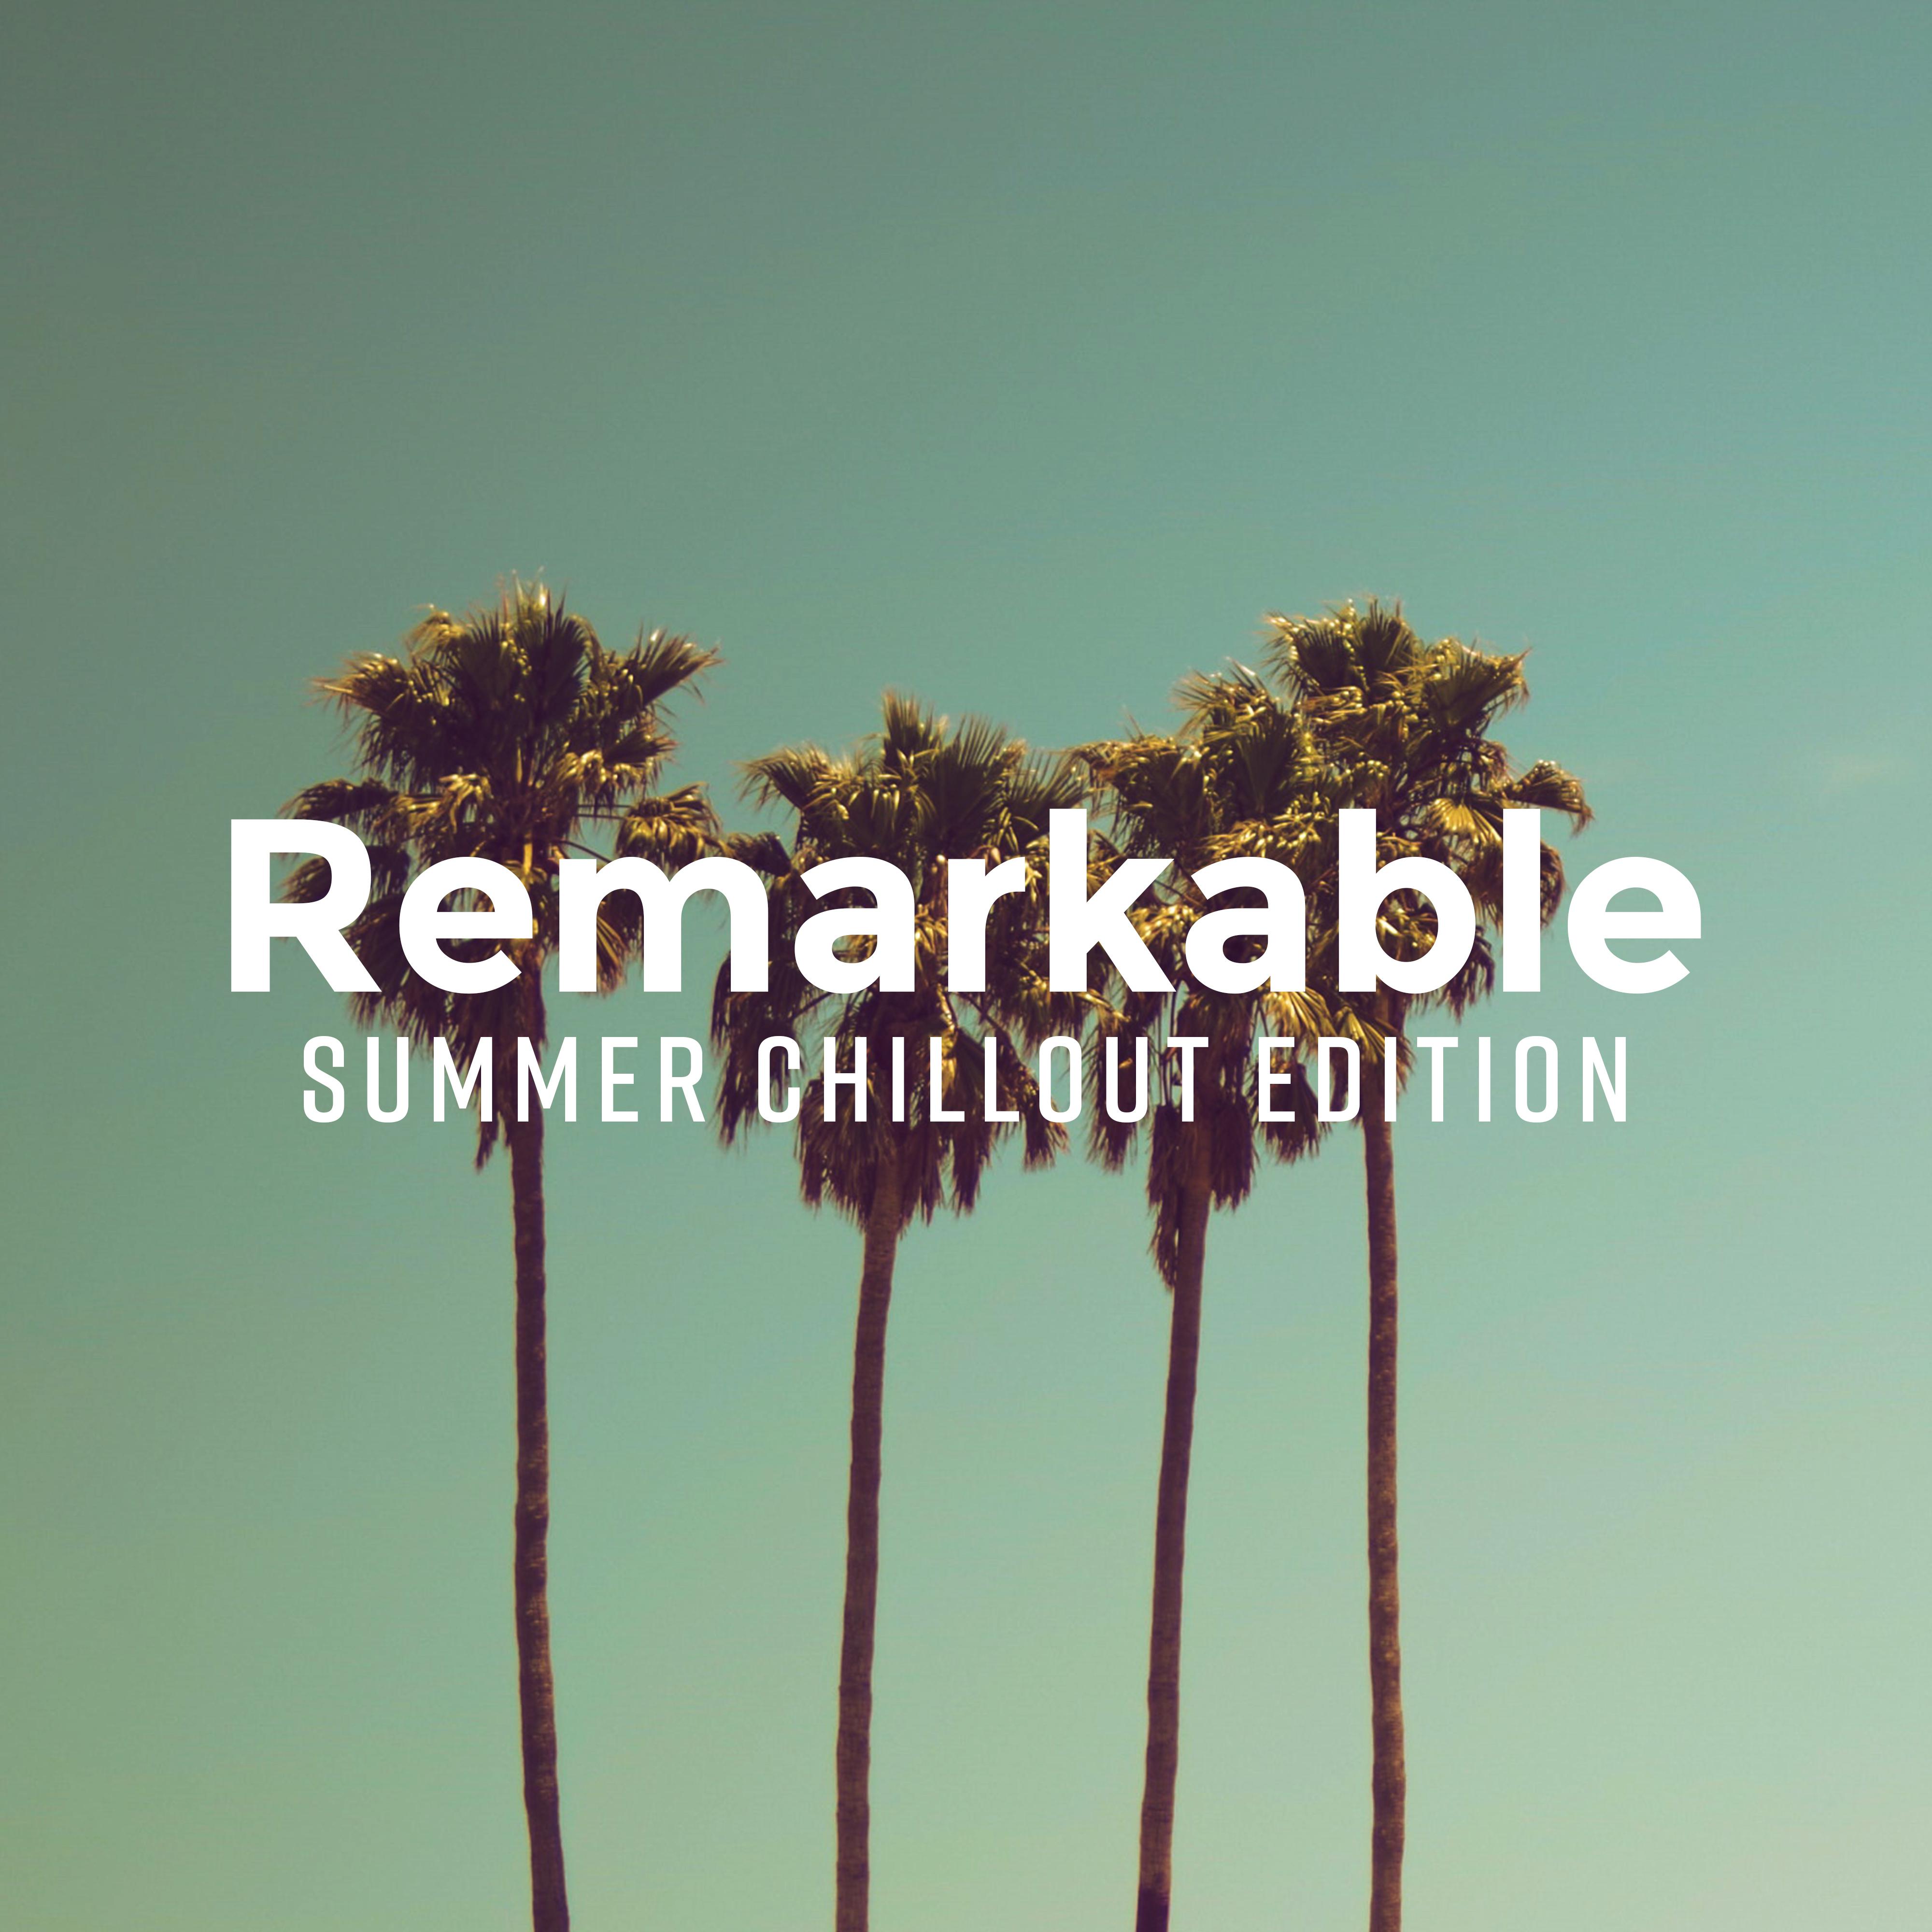 Remarkable Summer Chillout Edition: Top 15 Tracks to Relax on the Beach, in the Mountains, in the Countryside and Wherever You Go on a Holiday Trip